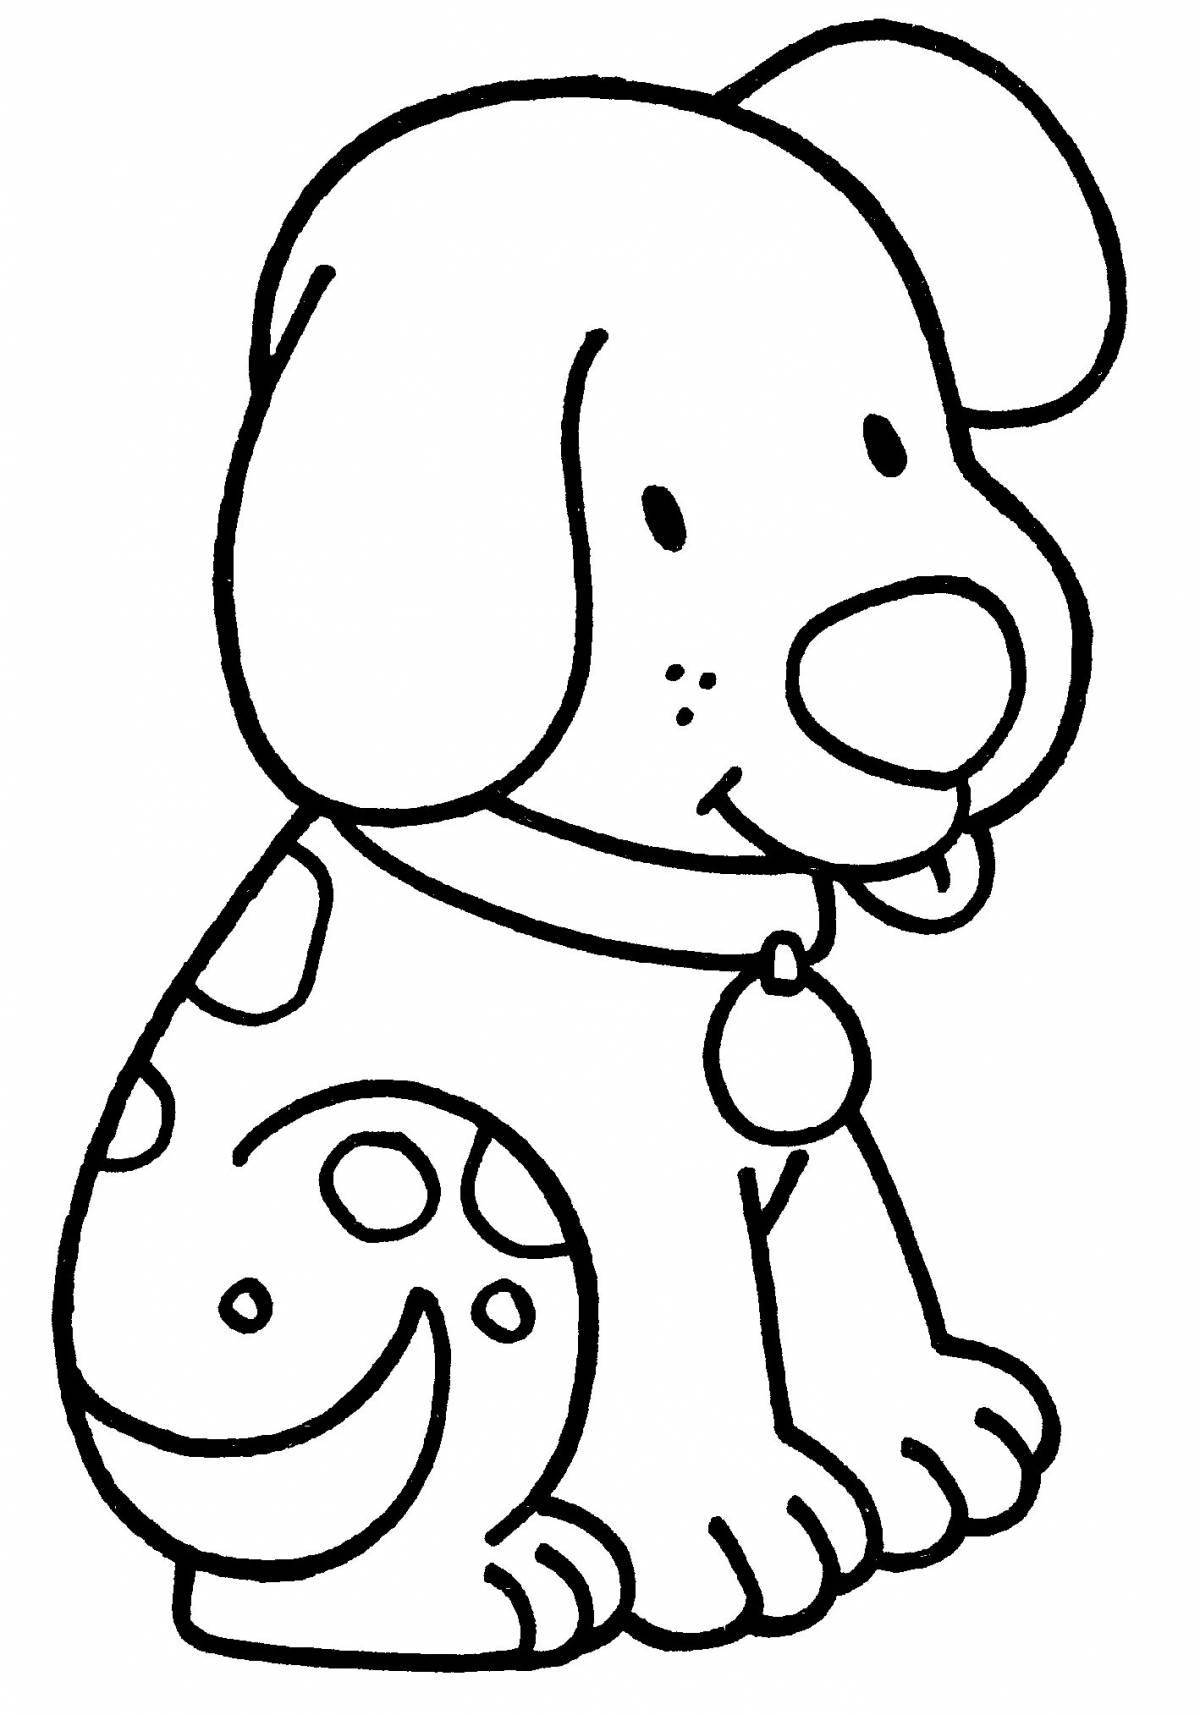 Coloring pages for children 2-3 years old